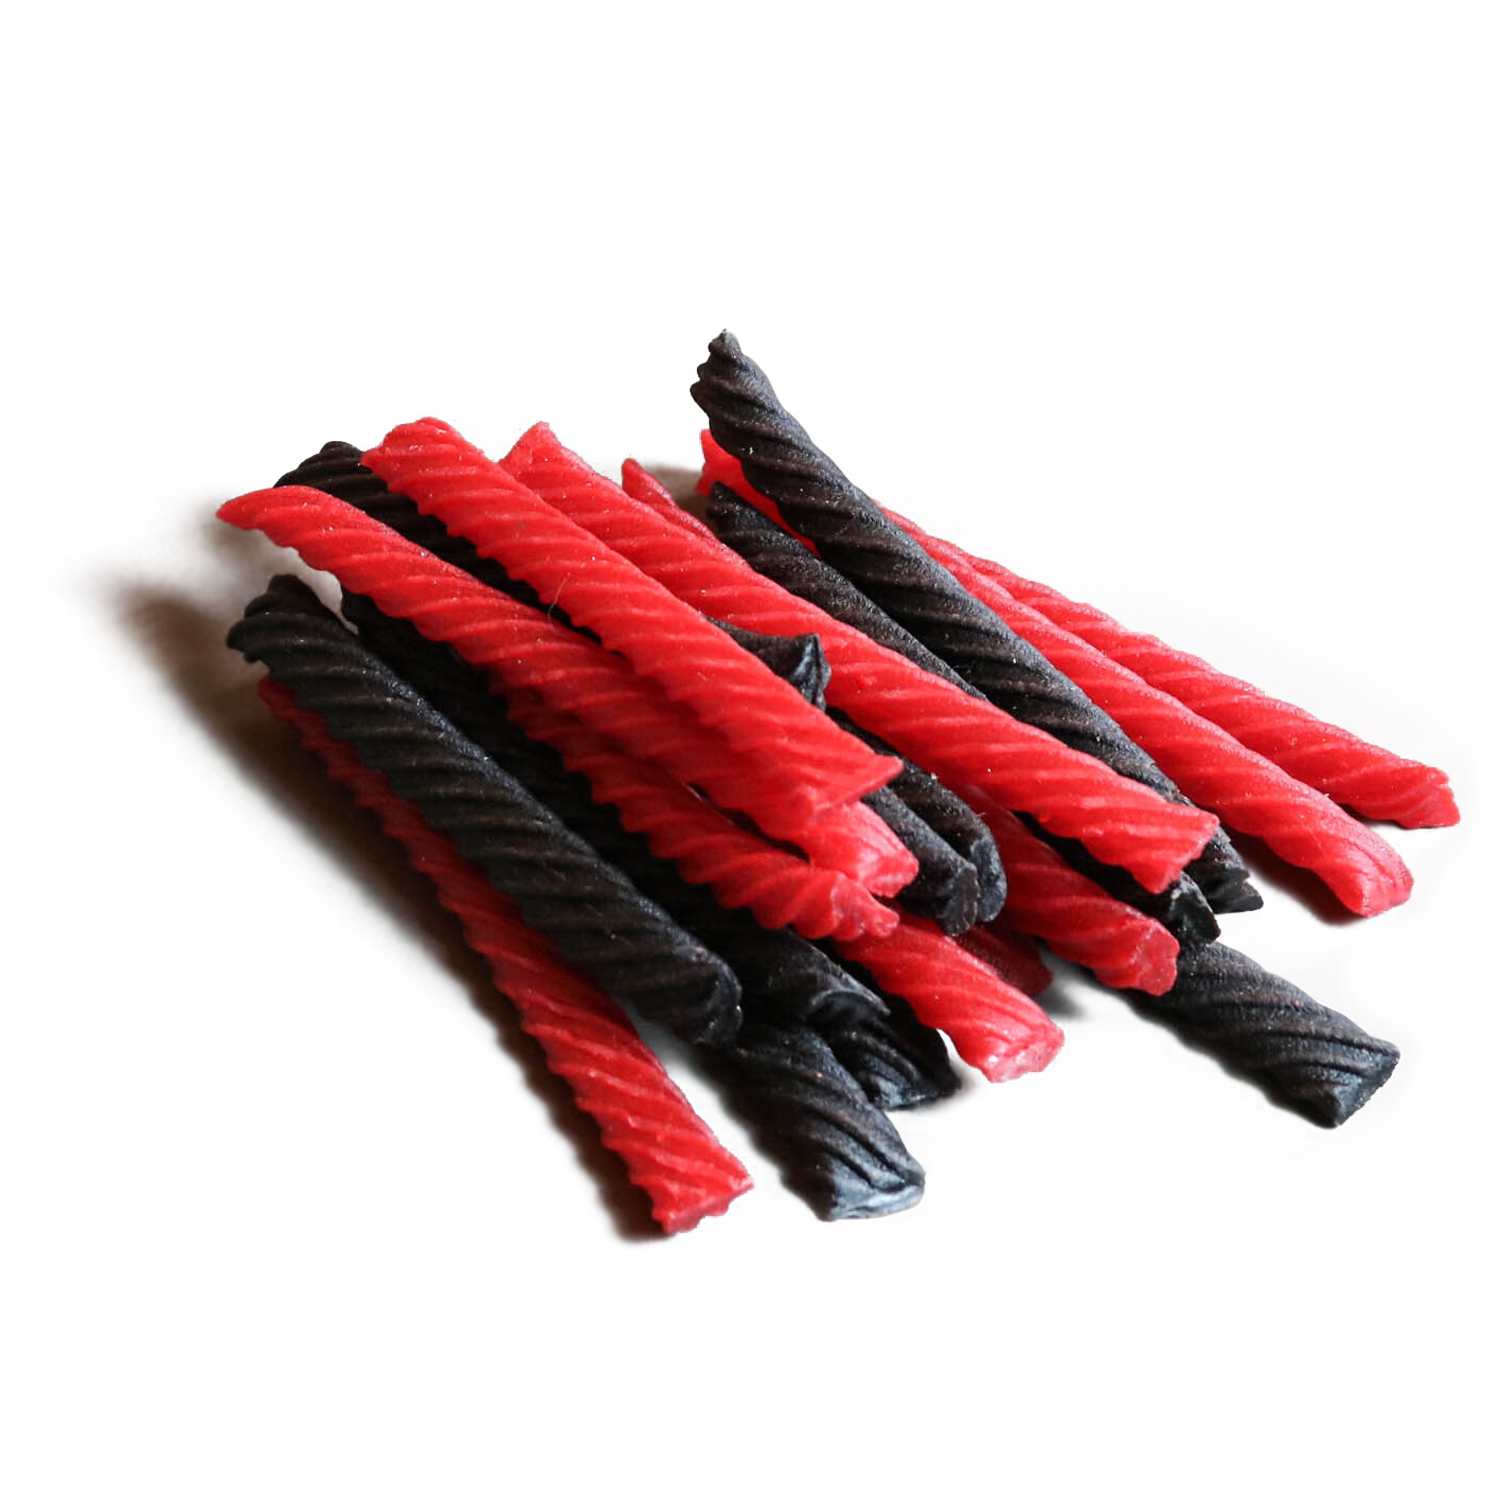 Red Vines Twists Family Mix Red & Black Licorice Candy, 27oz - image 4 of 8